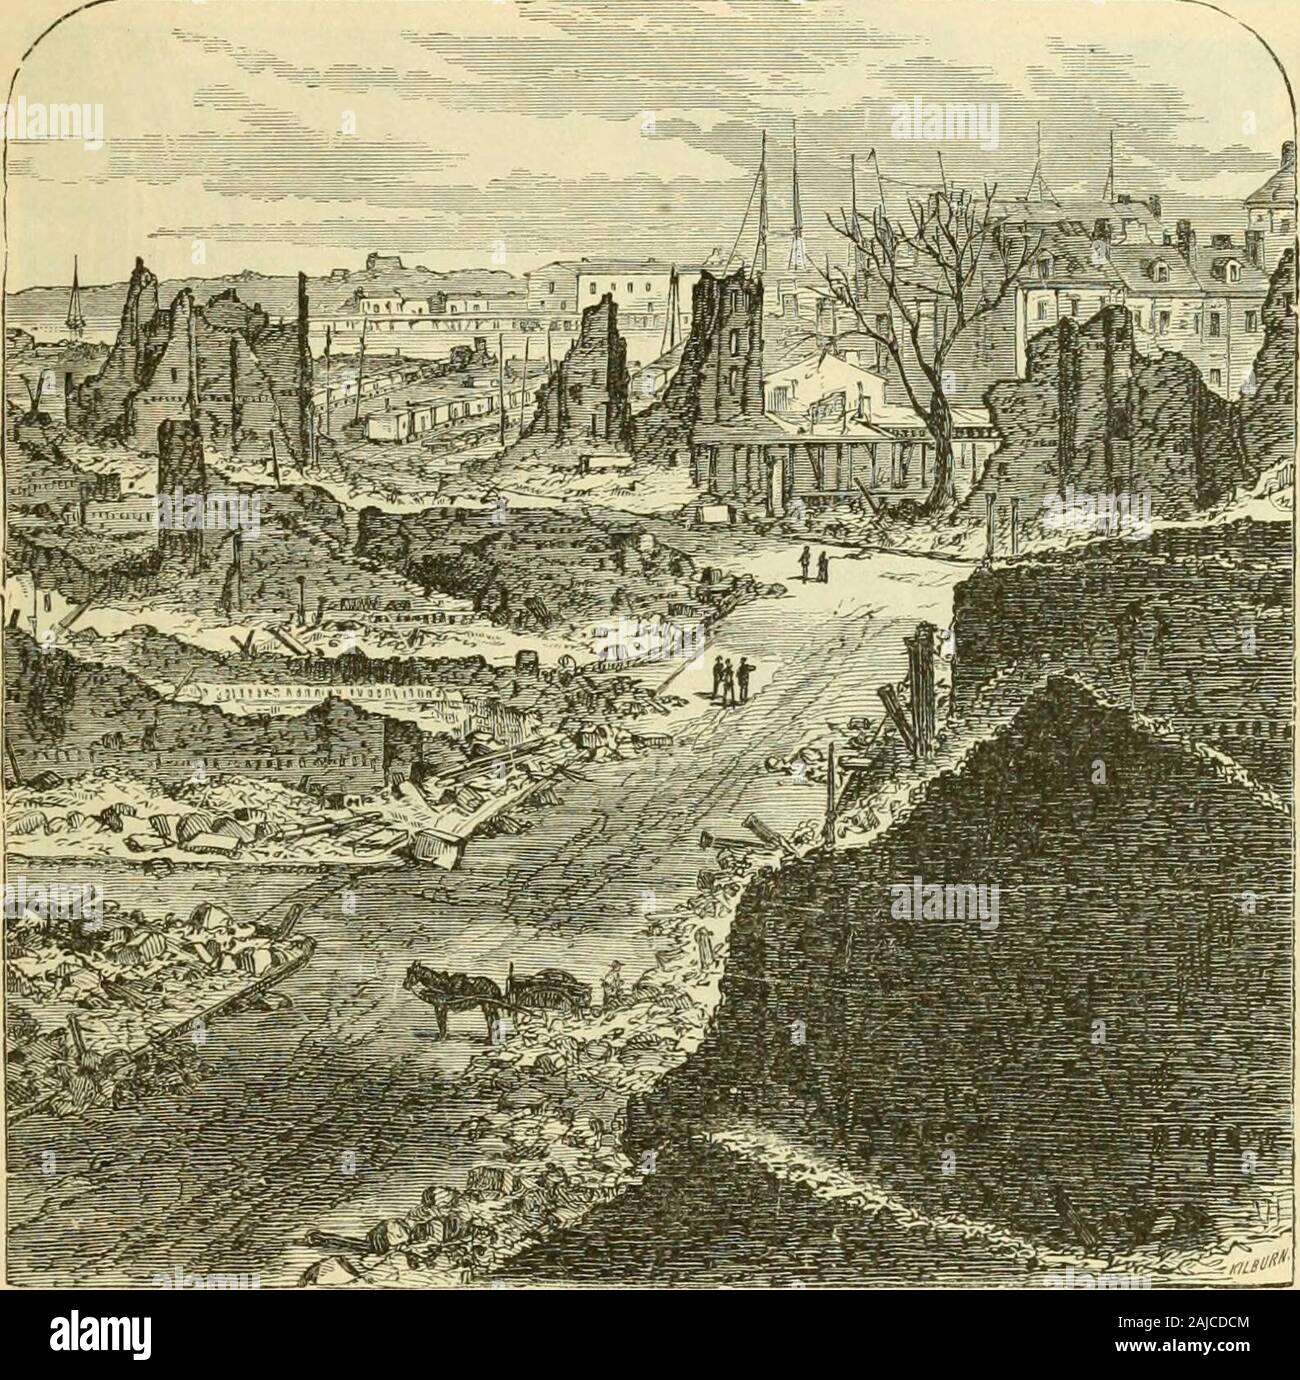 Boston illustrated; . BOSTON ILLUSTRATED. 71 The great fire of November 9th and 10th, 1872, occurred within this dis-trict. The accompanying sketch gives the most picturesque, while necessarilyan inadecjuate idea of the scene of desolation that prevailed over sixty-fiveacres of territory when the fire had at last been conquered. The fire broke out. The Spot wheie the Fire bei^an. at the corner of Summer and Kingston streets, and it did not cease to spreaduntil it had burned twenty hours. It destroyed 77G buildings, of which 709were of brick or stone and 67 of wood. The valuation of these build Stock Photo